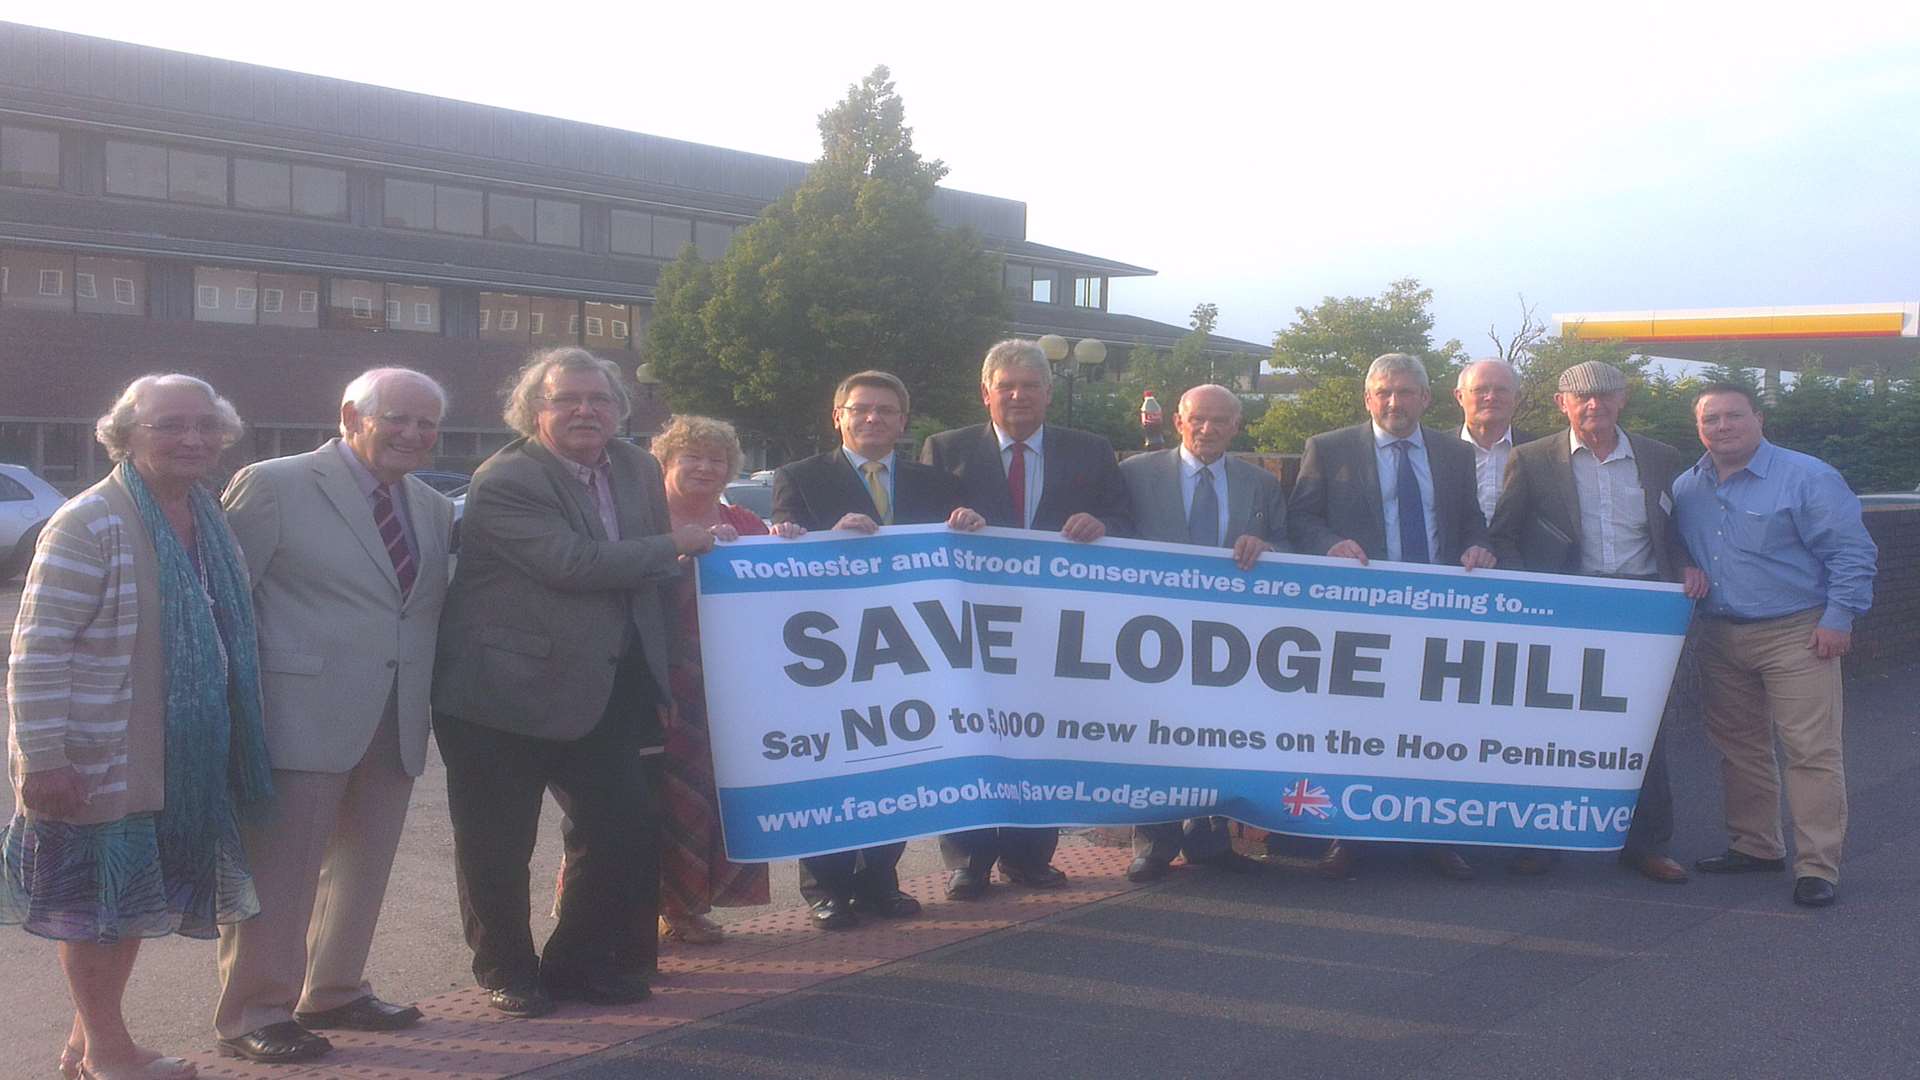 Cllr Chris Irvine (far right) and members of the Rochester and Strood Conservatives protested before the planning meeting last night.